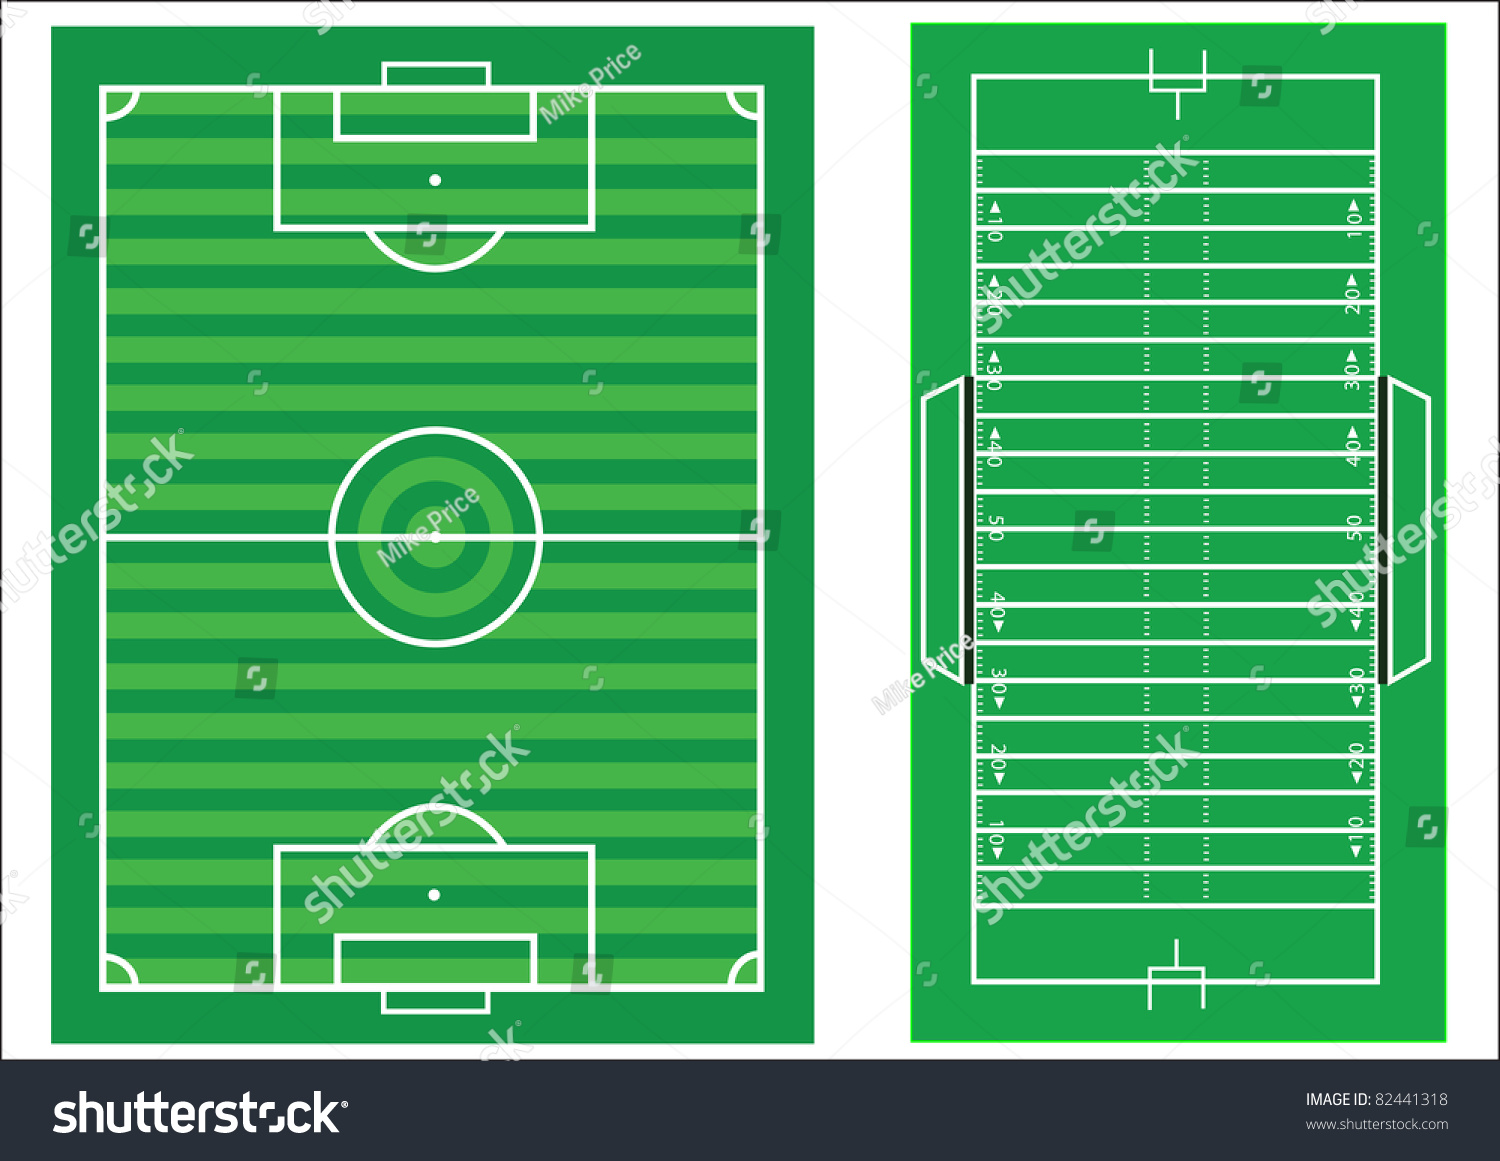 Scale Diagrams Of A Soccer Pitch And An American Football Field, With